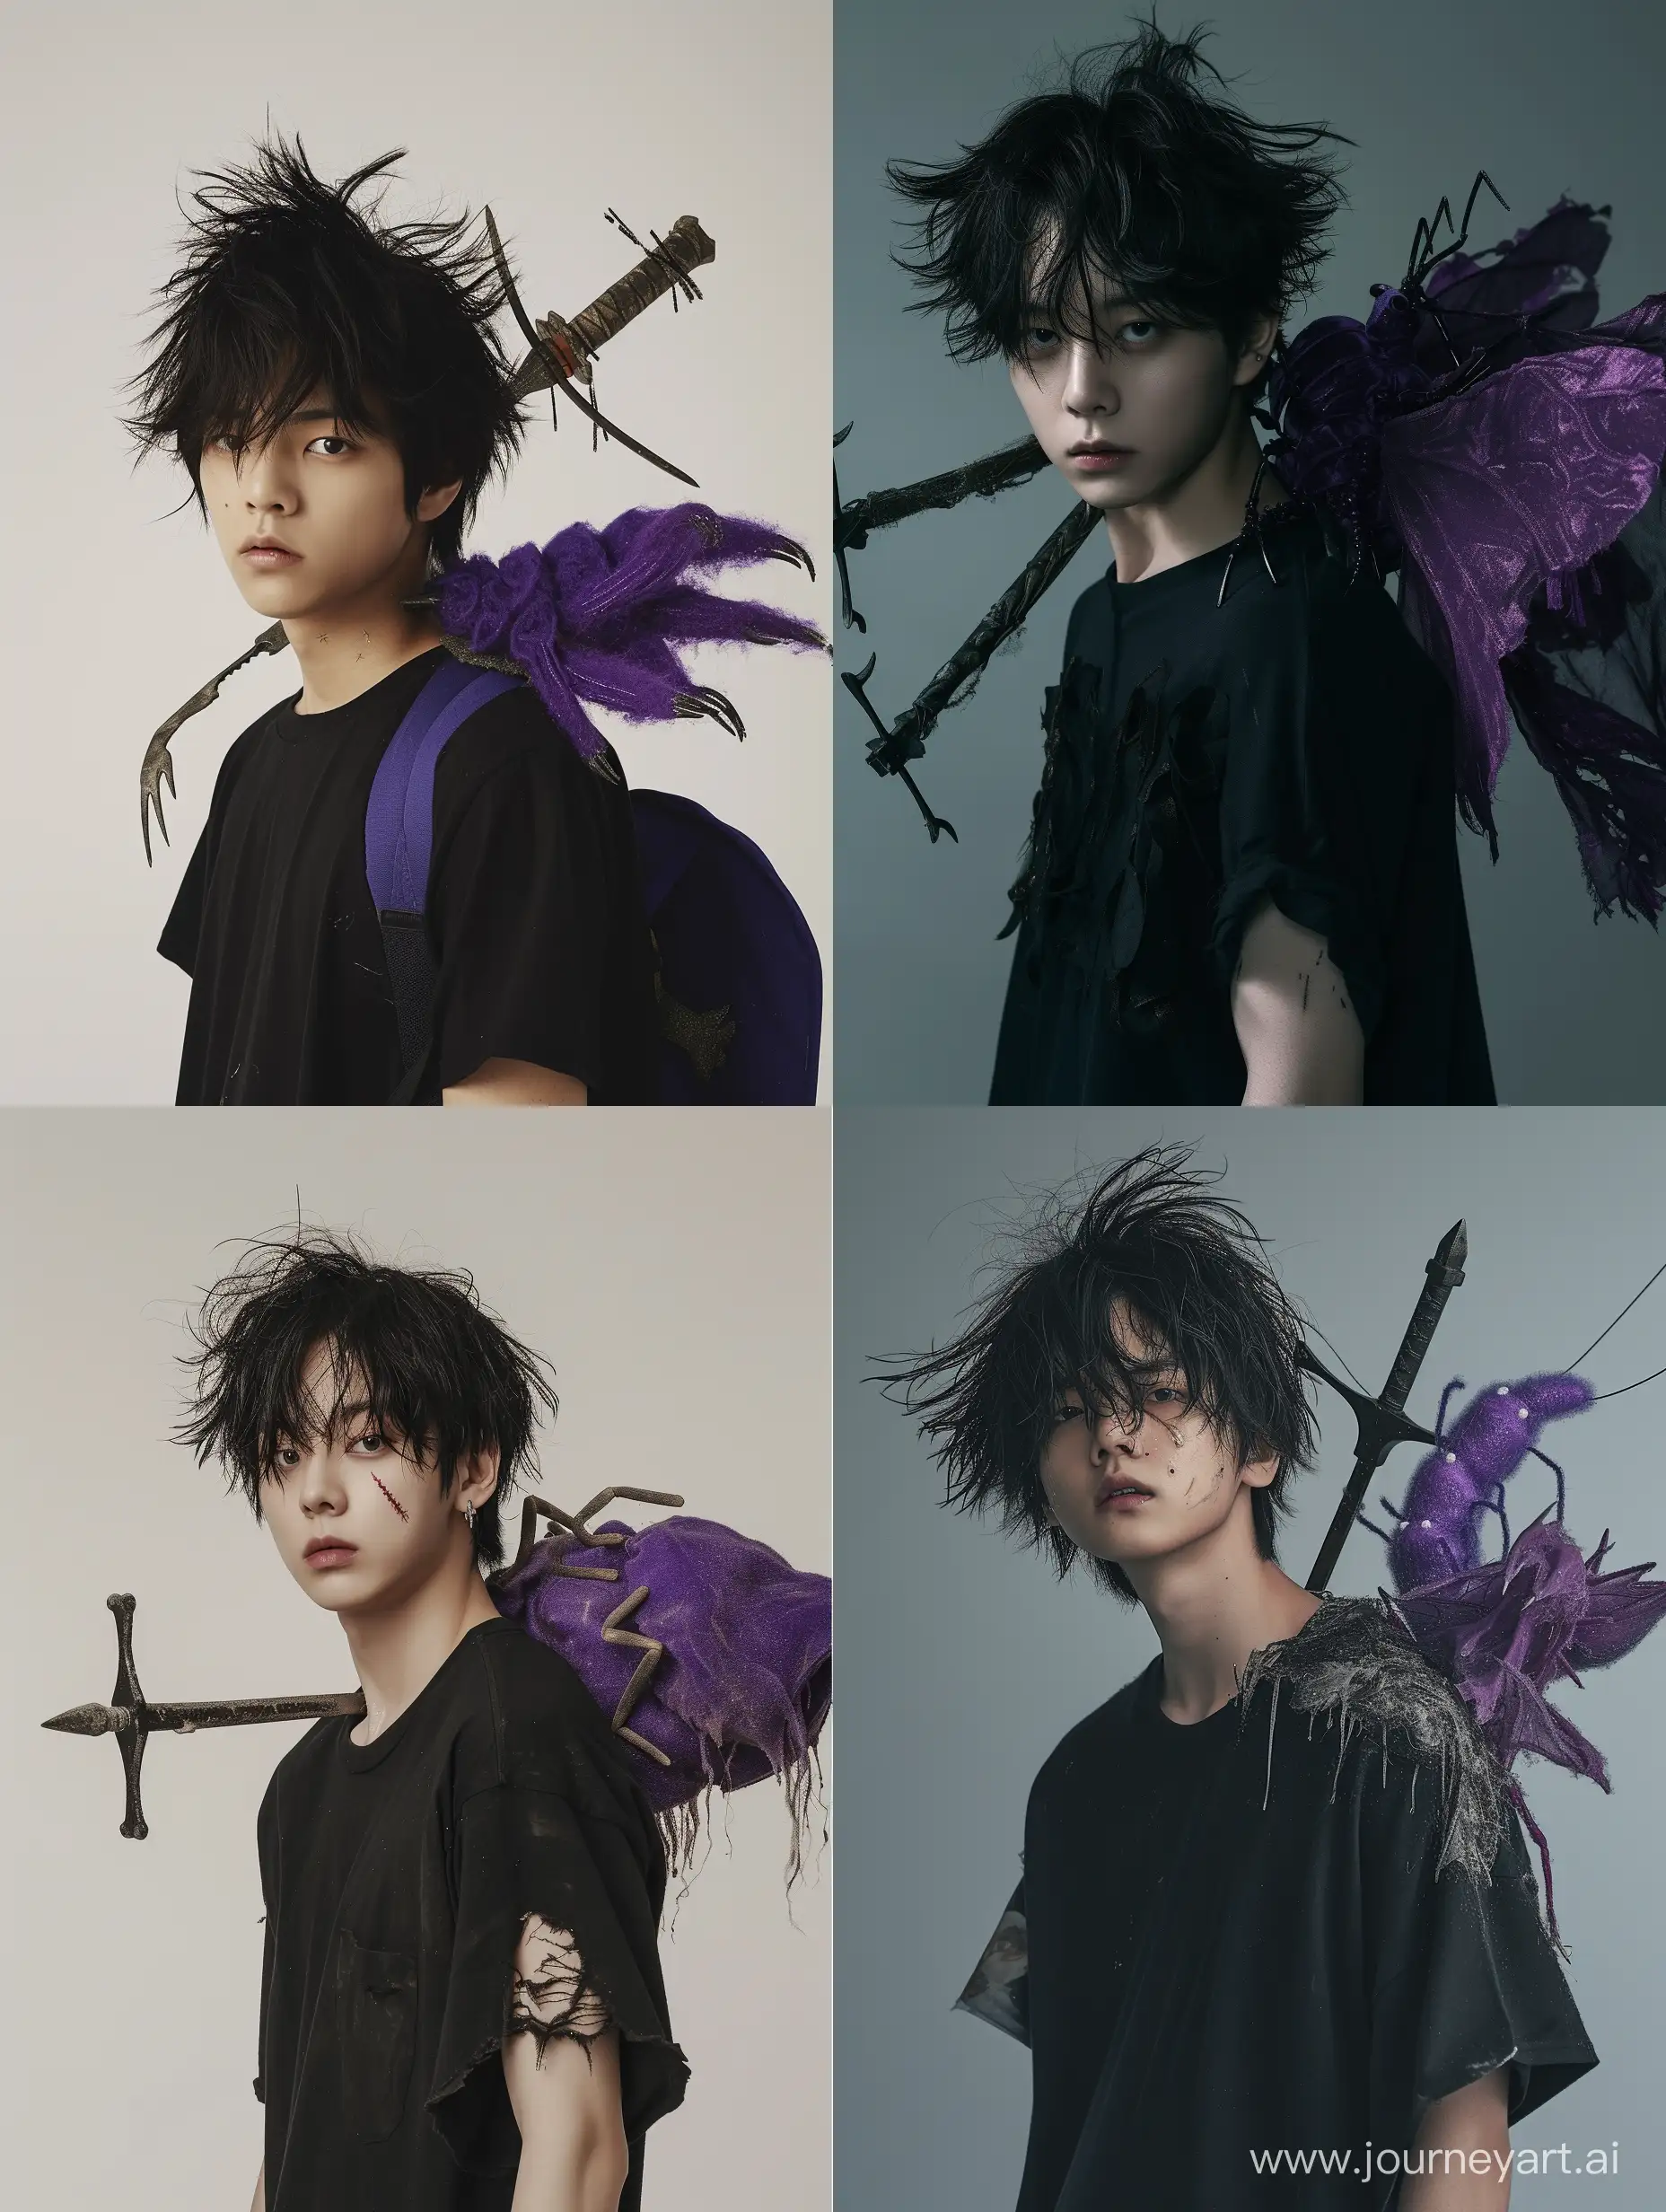 Made a super high angle photo of a young guy like taehyung or a Korean idol with messy black hair, his body clearly sweating. Very HD. The costume is a black t-shirt. On his shoulder was a large purple caterpillar. Holding a two-pronged broken sword